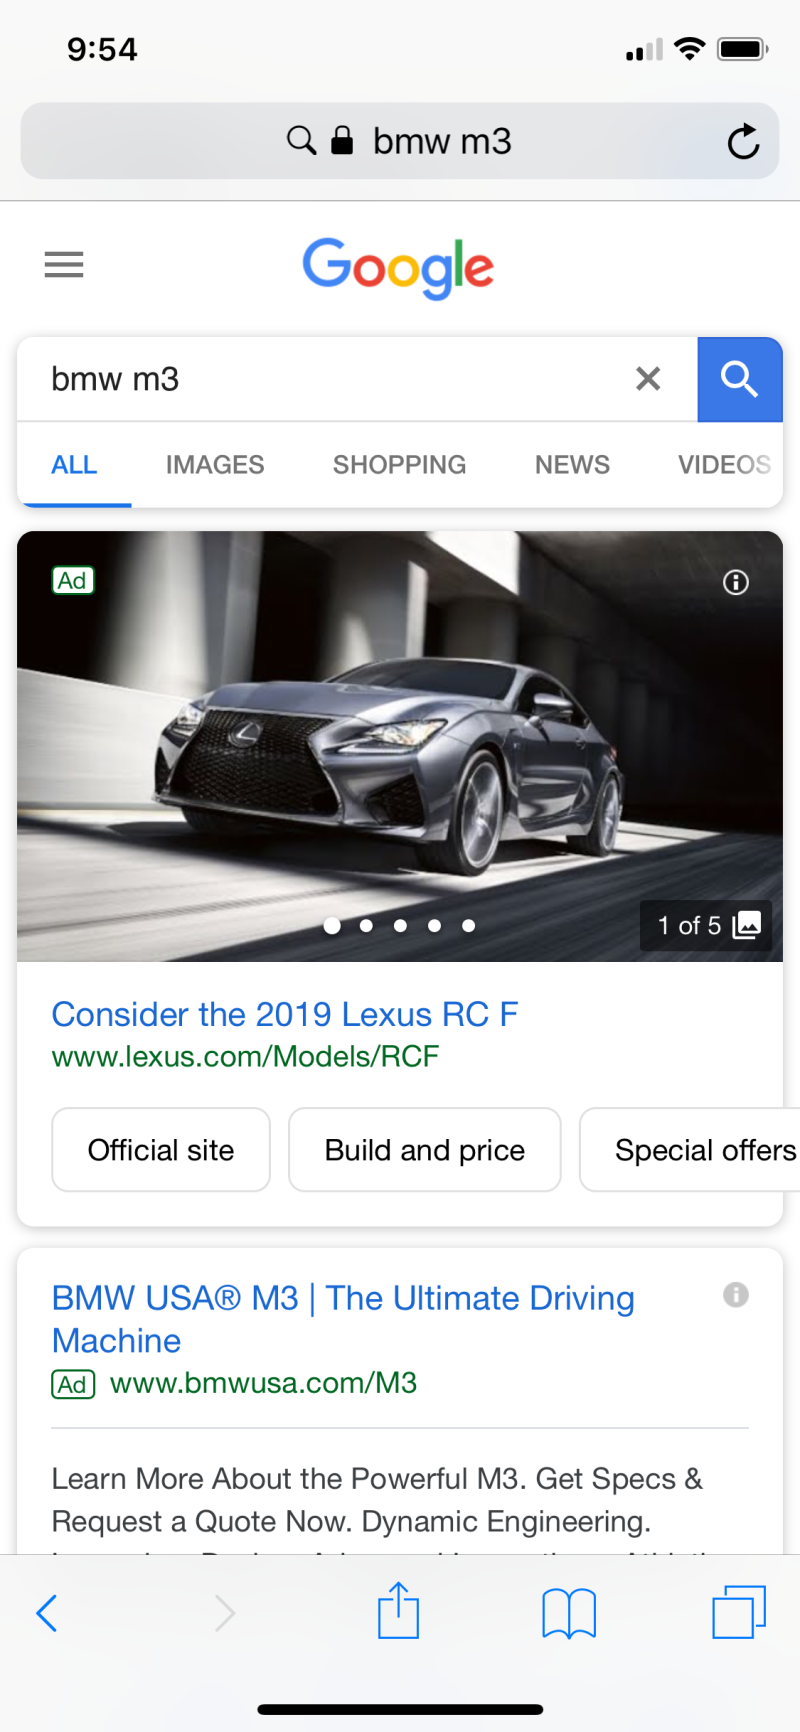 Illustration for article titled Lexus knows how ads work